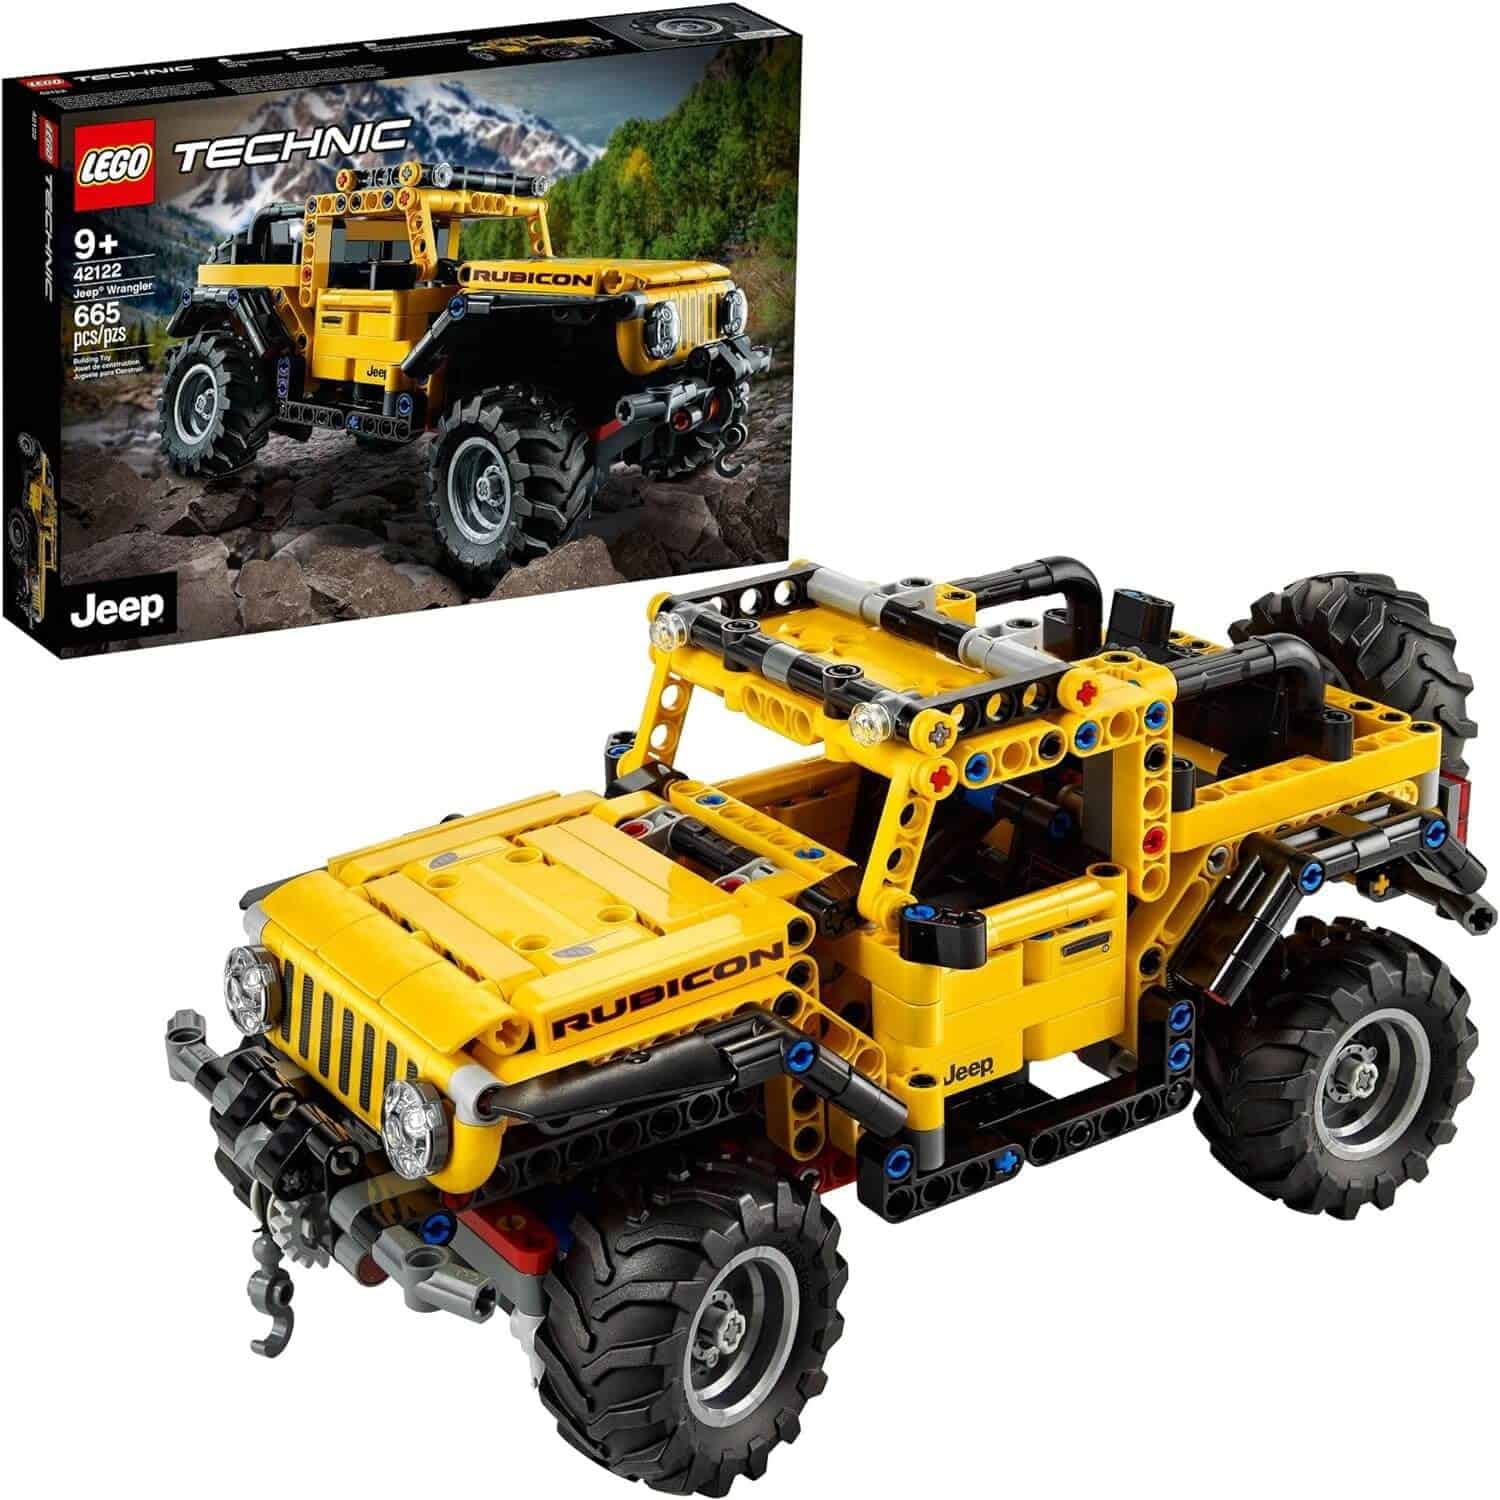 Jeep Wrangler SUV car model with an eye-catching, realistic yellow-and-black color scheme that looks great in action or on display. Includes authentic Jeep Wrangler details, like the classic round headlights, seven-slot grille, full-size spare tire and fold-down back seats